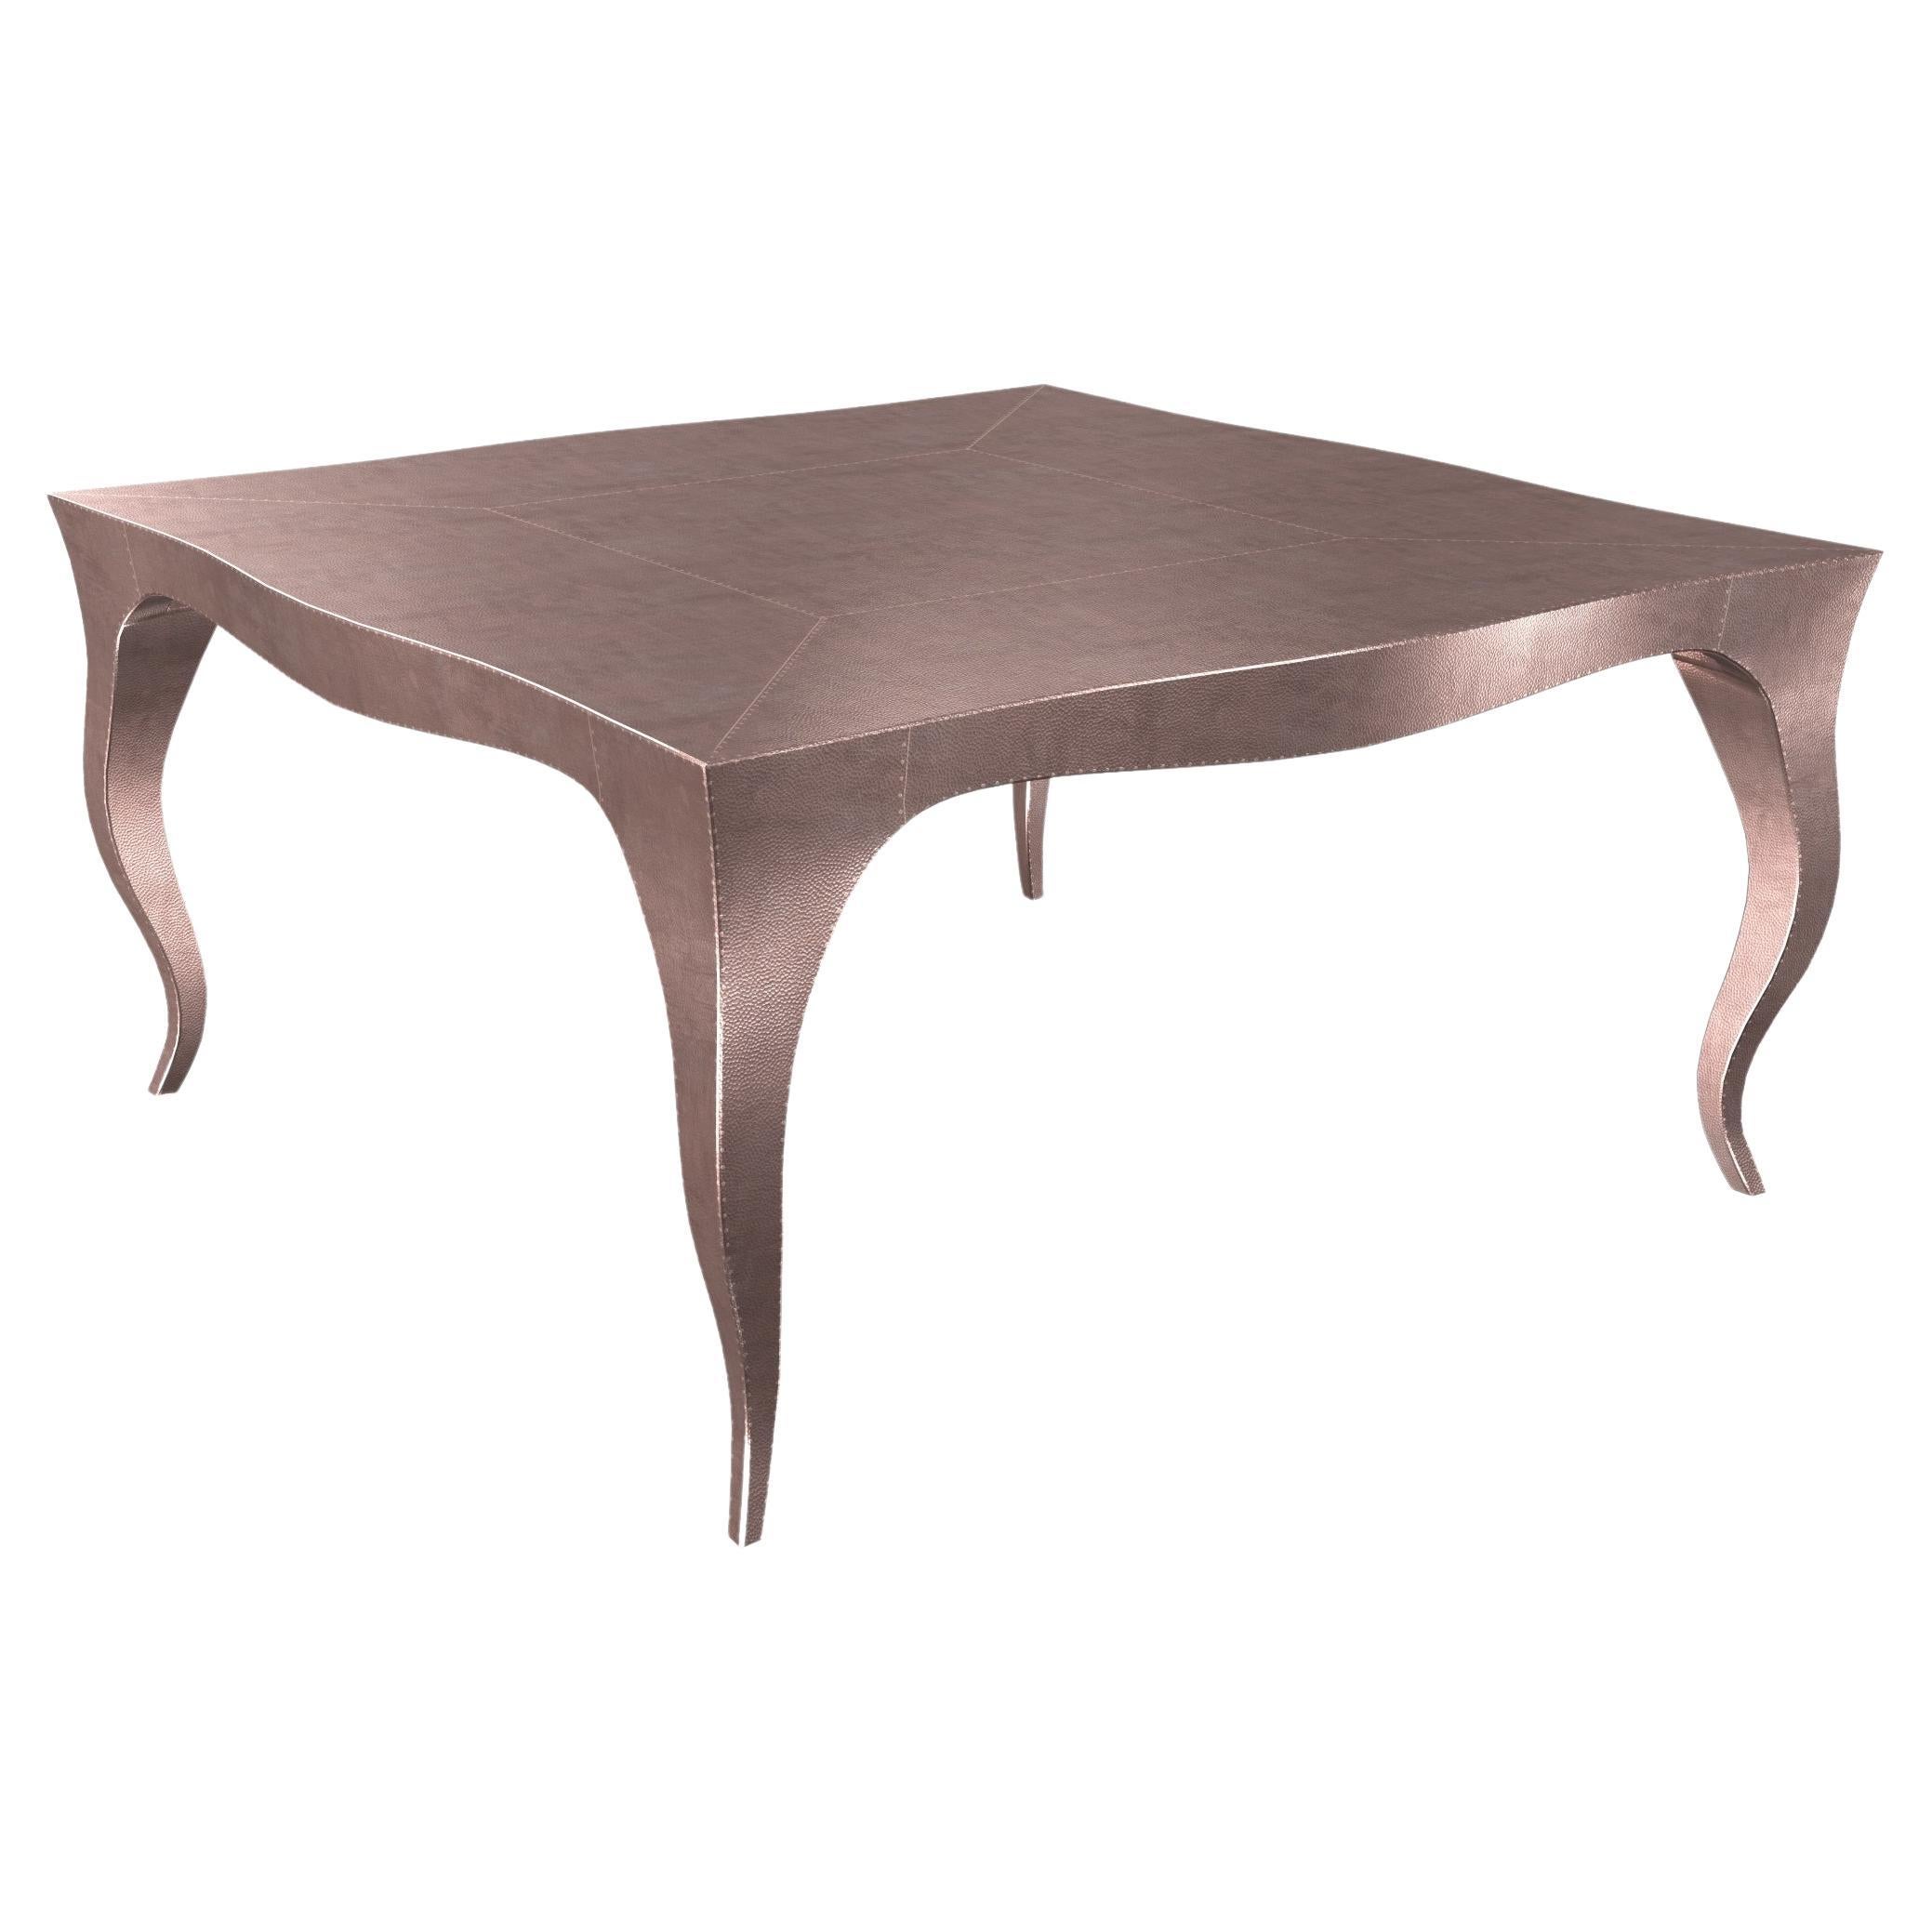 Louise Art Deco Center Tables Mid. Hammered Copper by Paul Mathieu for S.Odegard For Sale